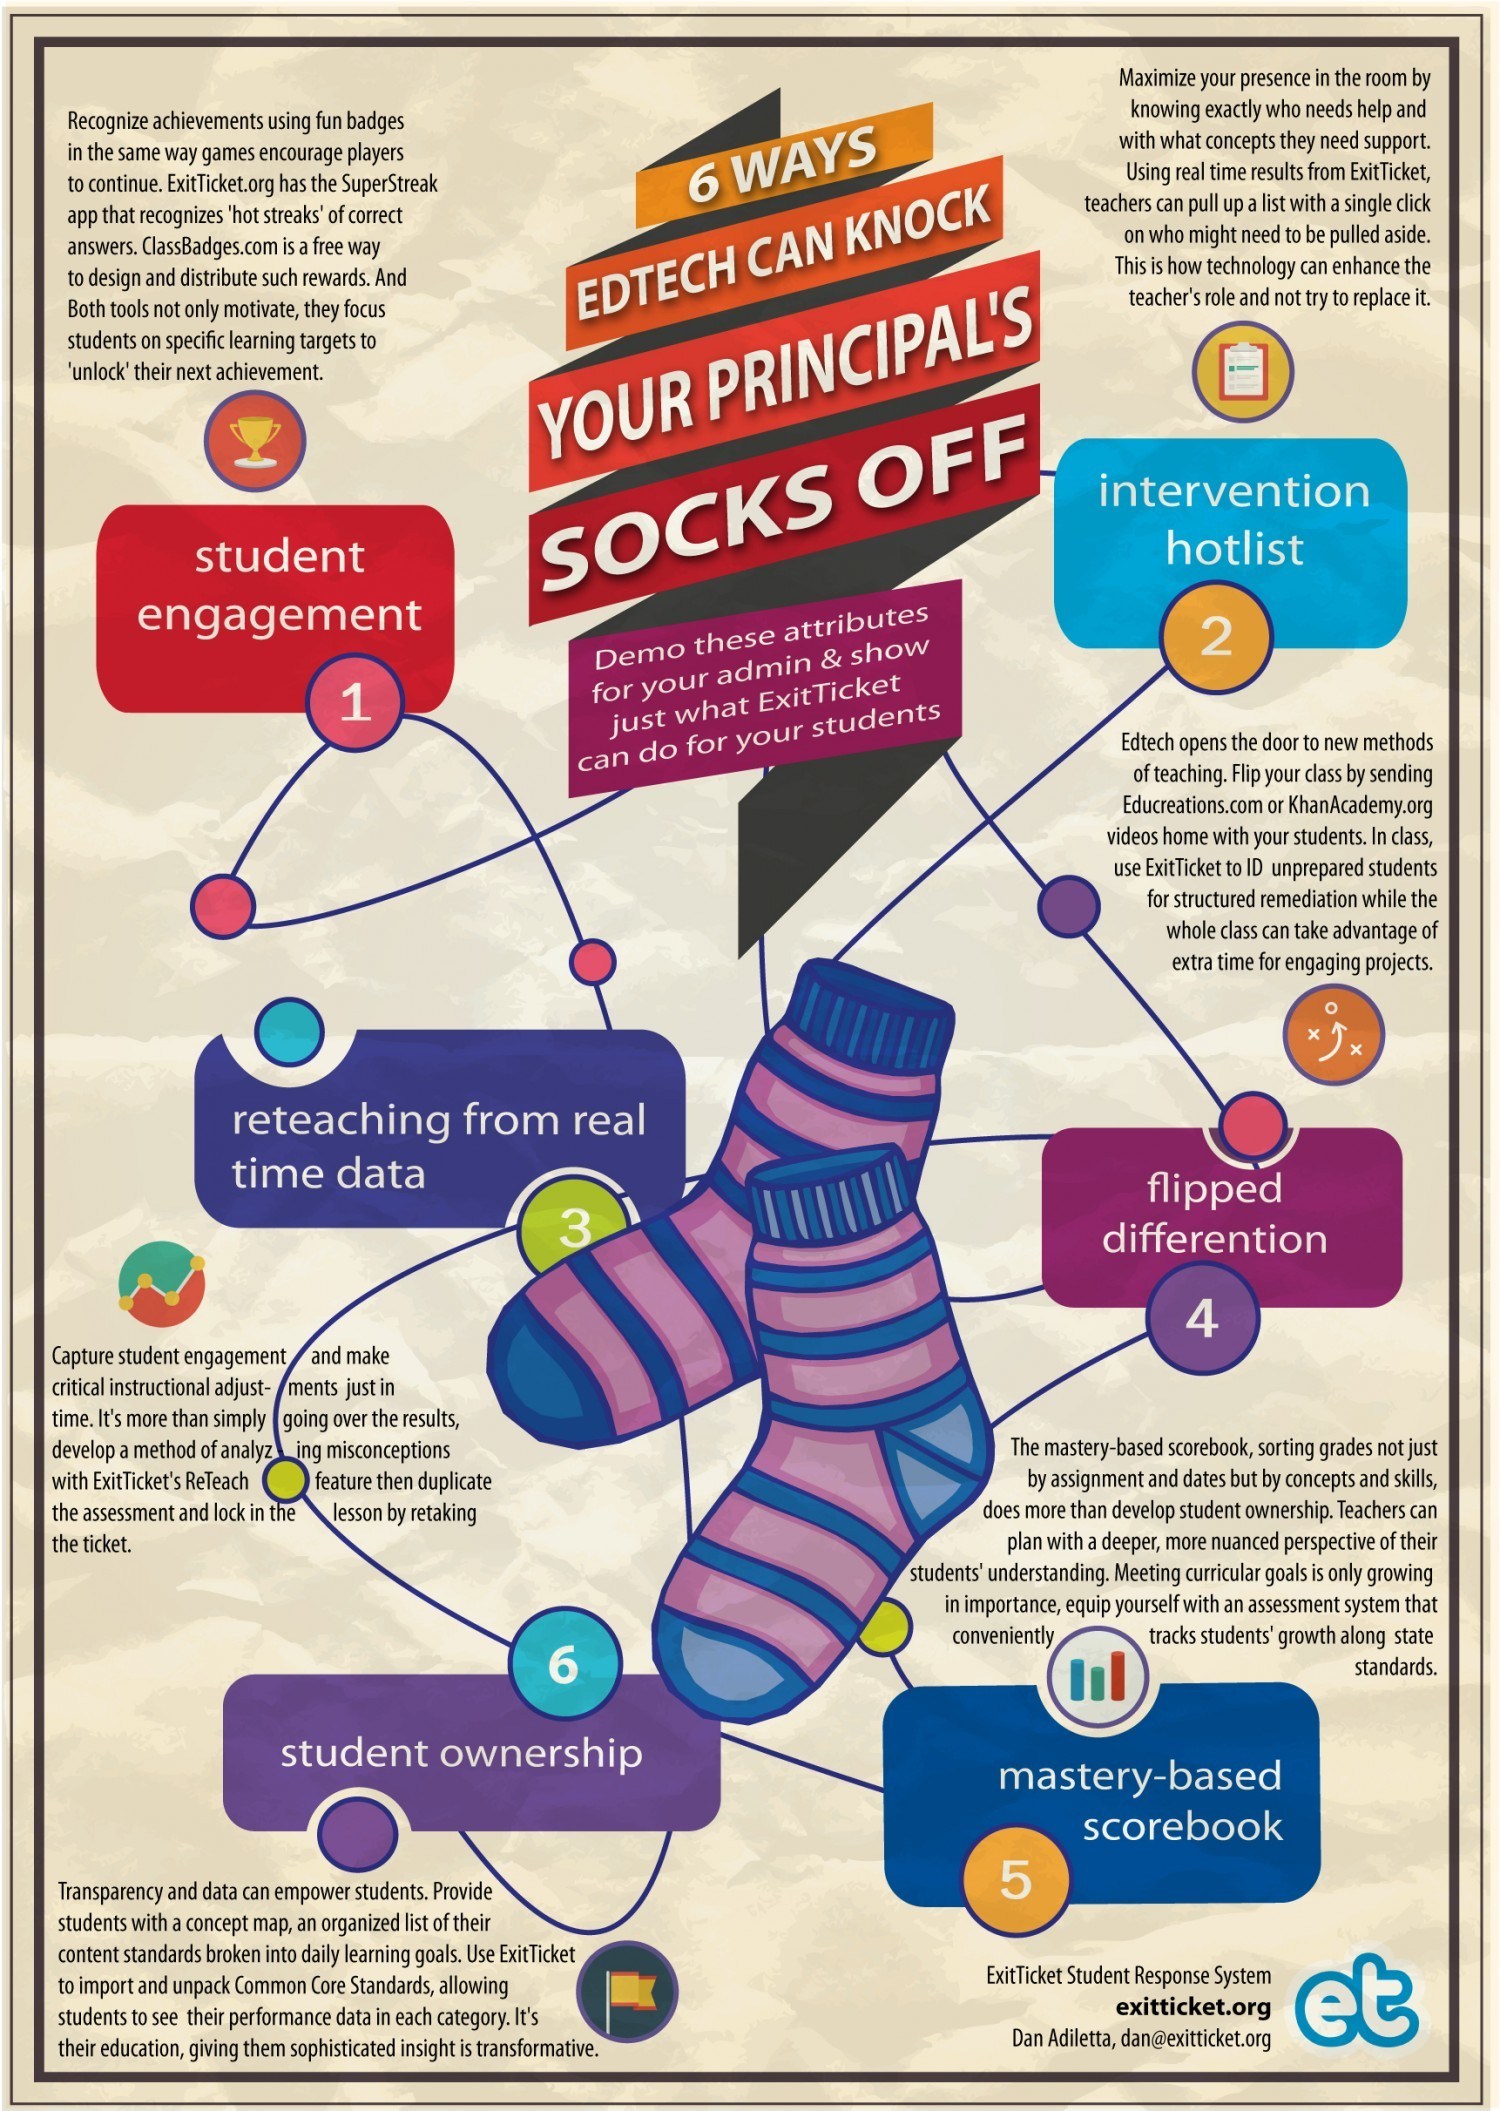 6 Ways EdTech Can Knock Your Principal's Socks Off Infographic